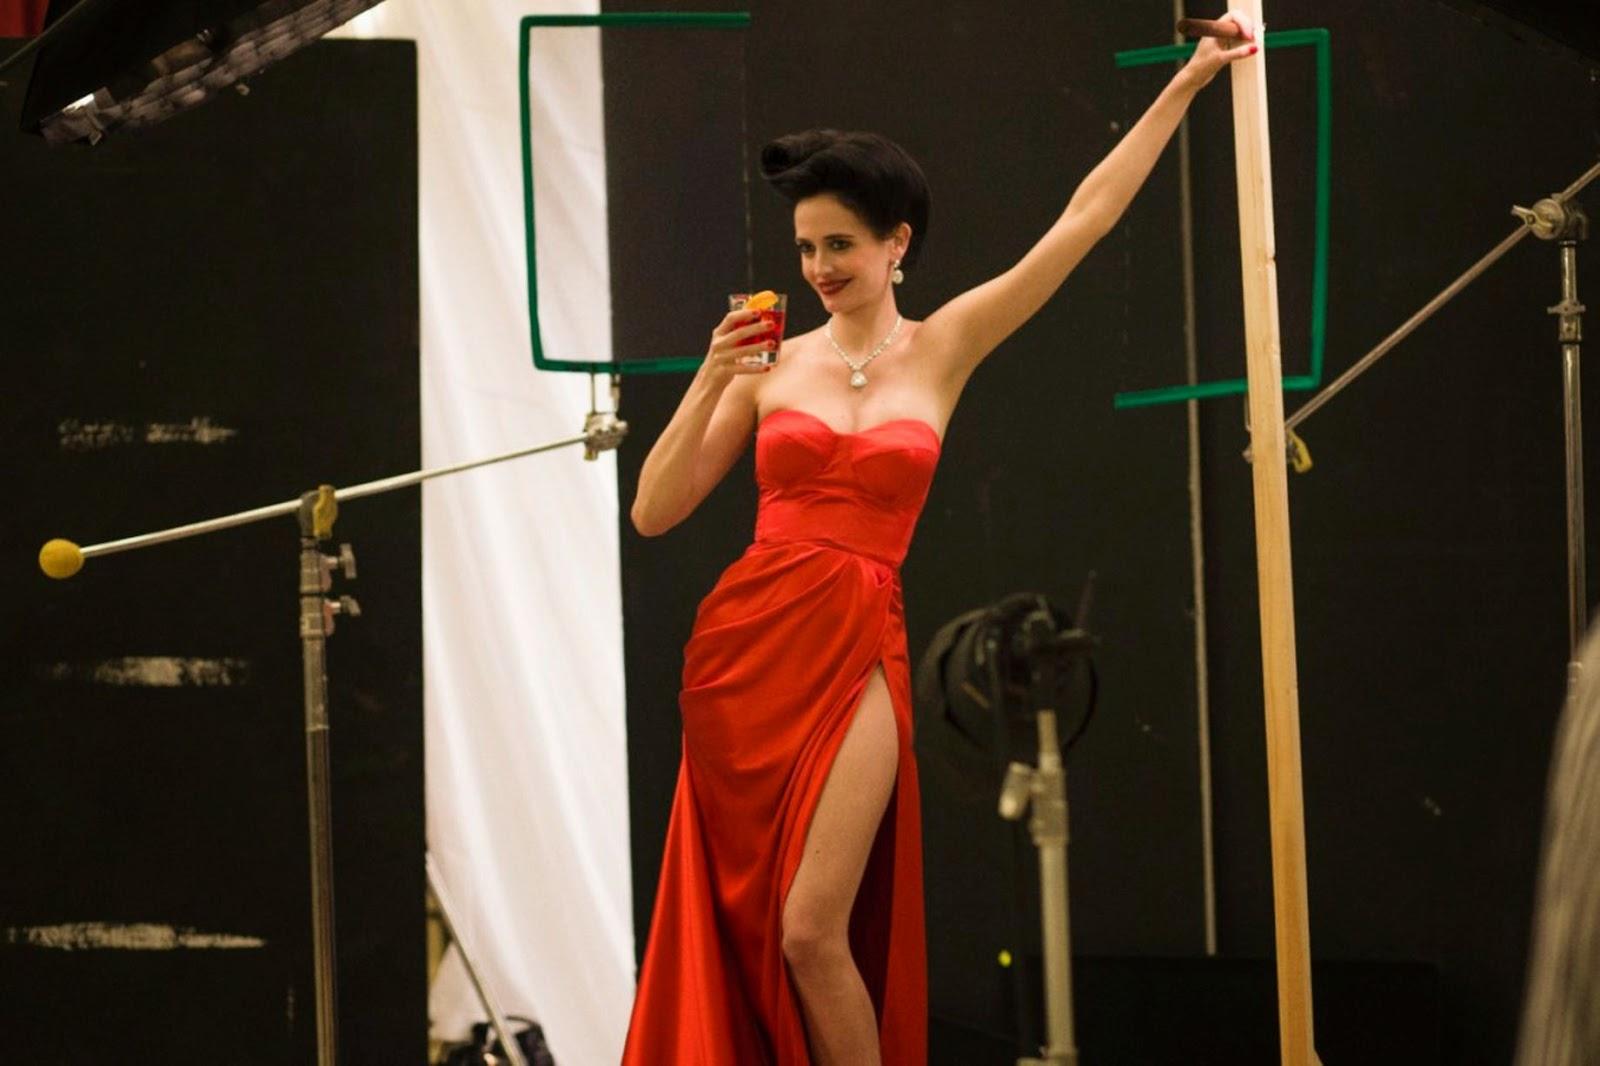 43 Hot Pictures Of Eva Green Expose Her Sexy Bikini Body To The World | Best Of Comic Books